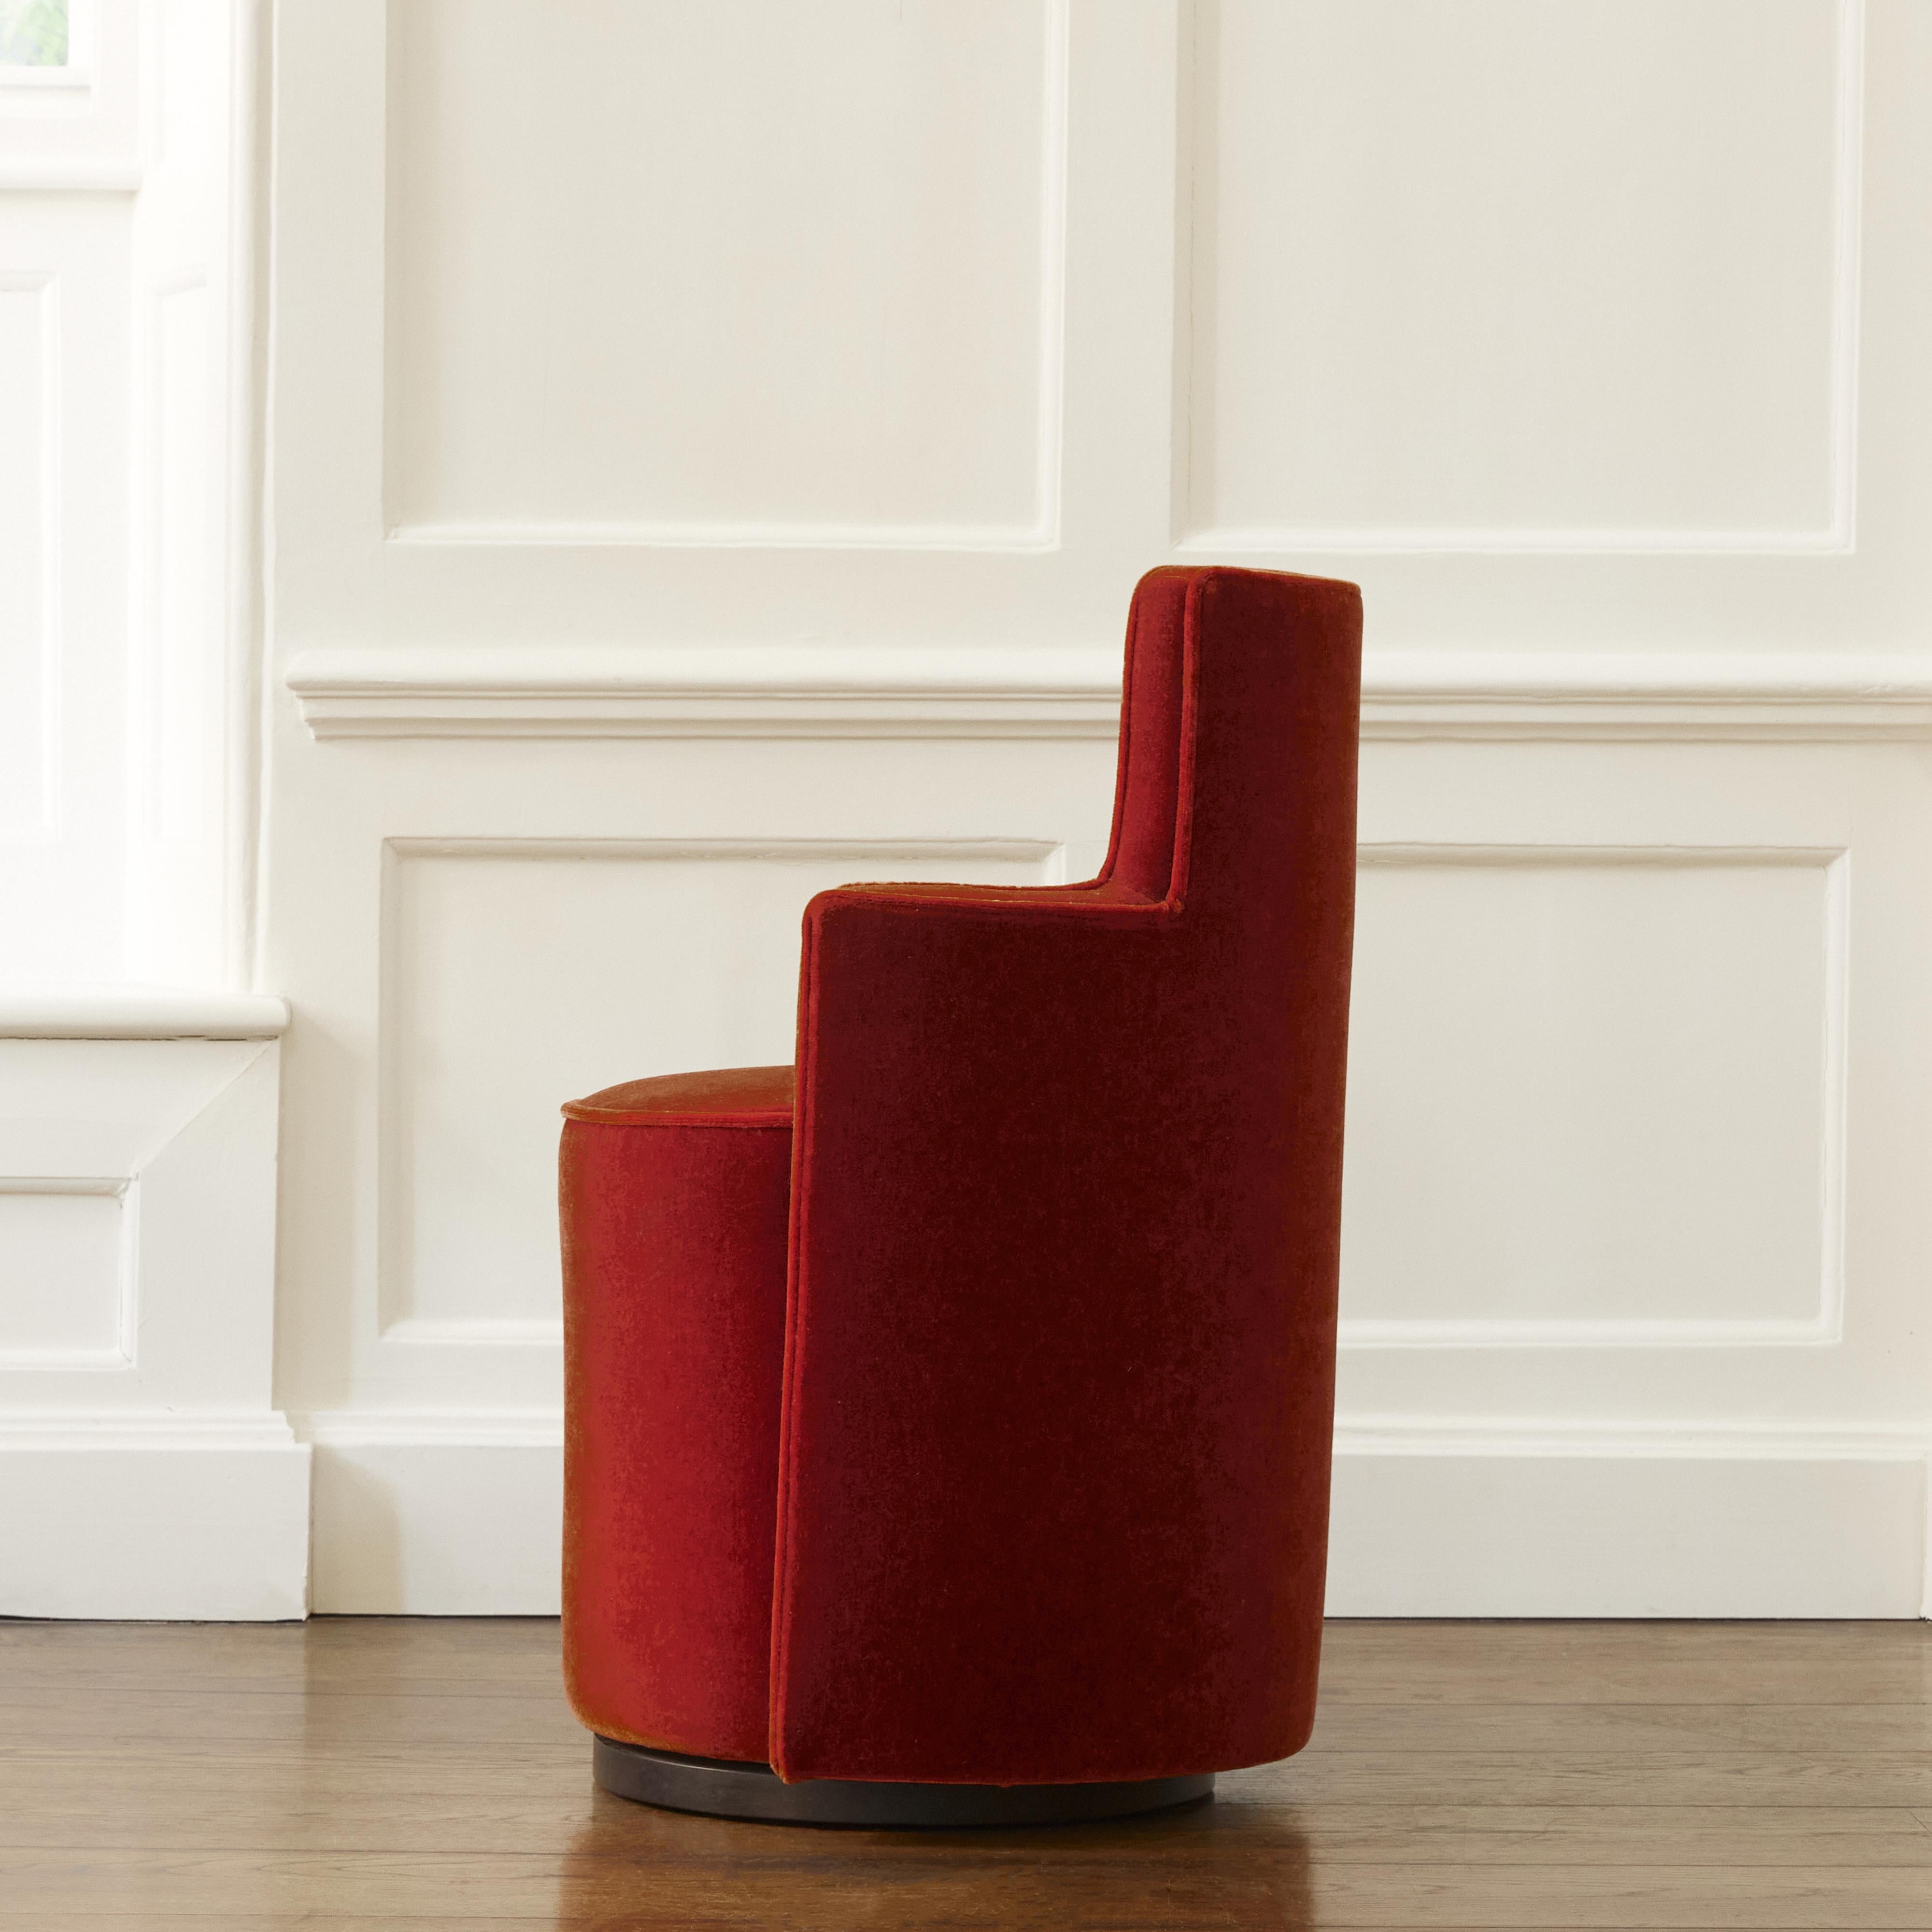 Inspired by art deco stepped motifs and with its form-hugging curved back, the Two-Step is a totally unique piece.  Crafted with a super smooth swivel base, this chair offers both style and functionality. It’s the perfect mate for any dressing